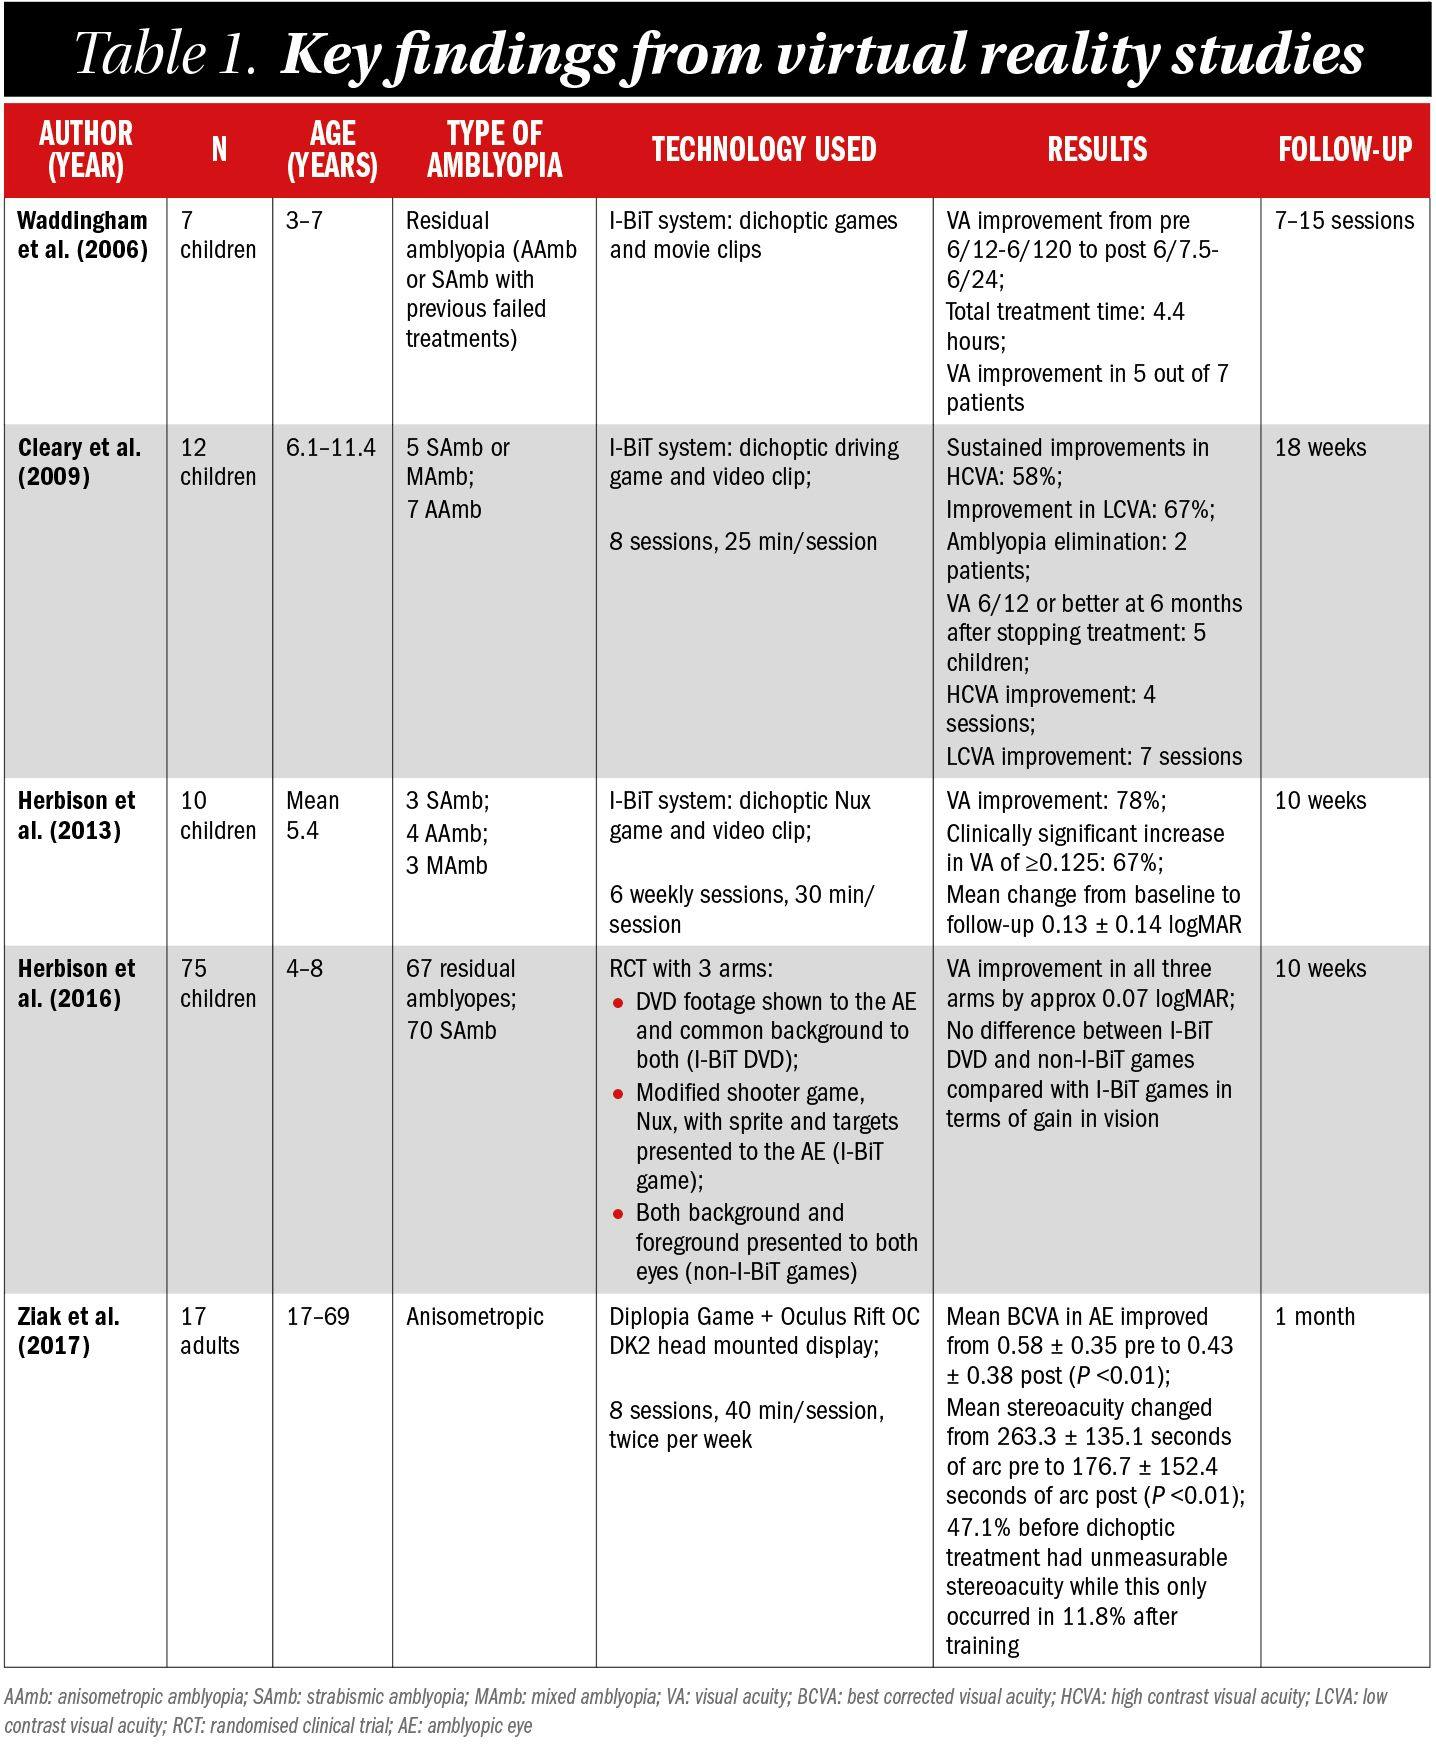 Table. Summary of the clinical scientific experience to date on the use of VR-based environments for the treatment of amblyopia.